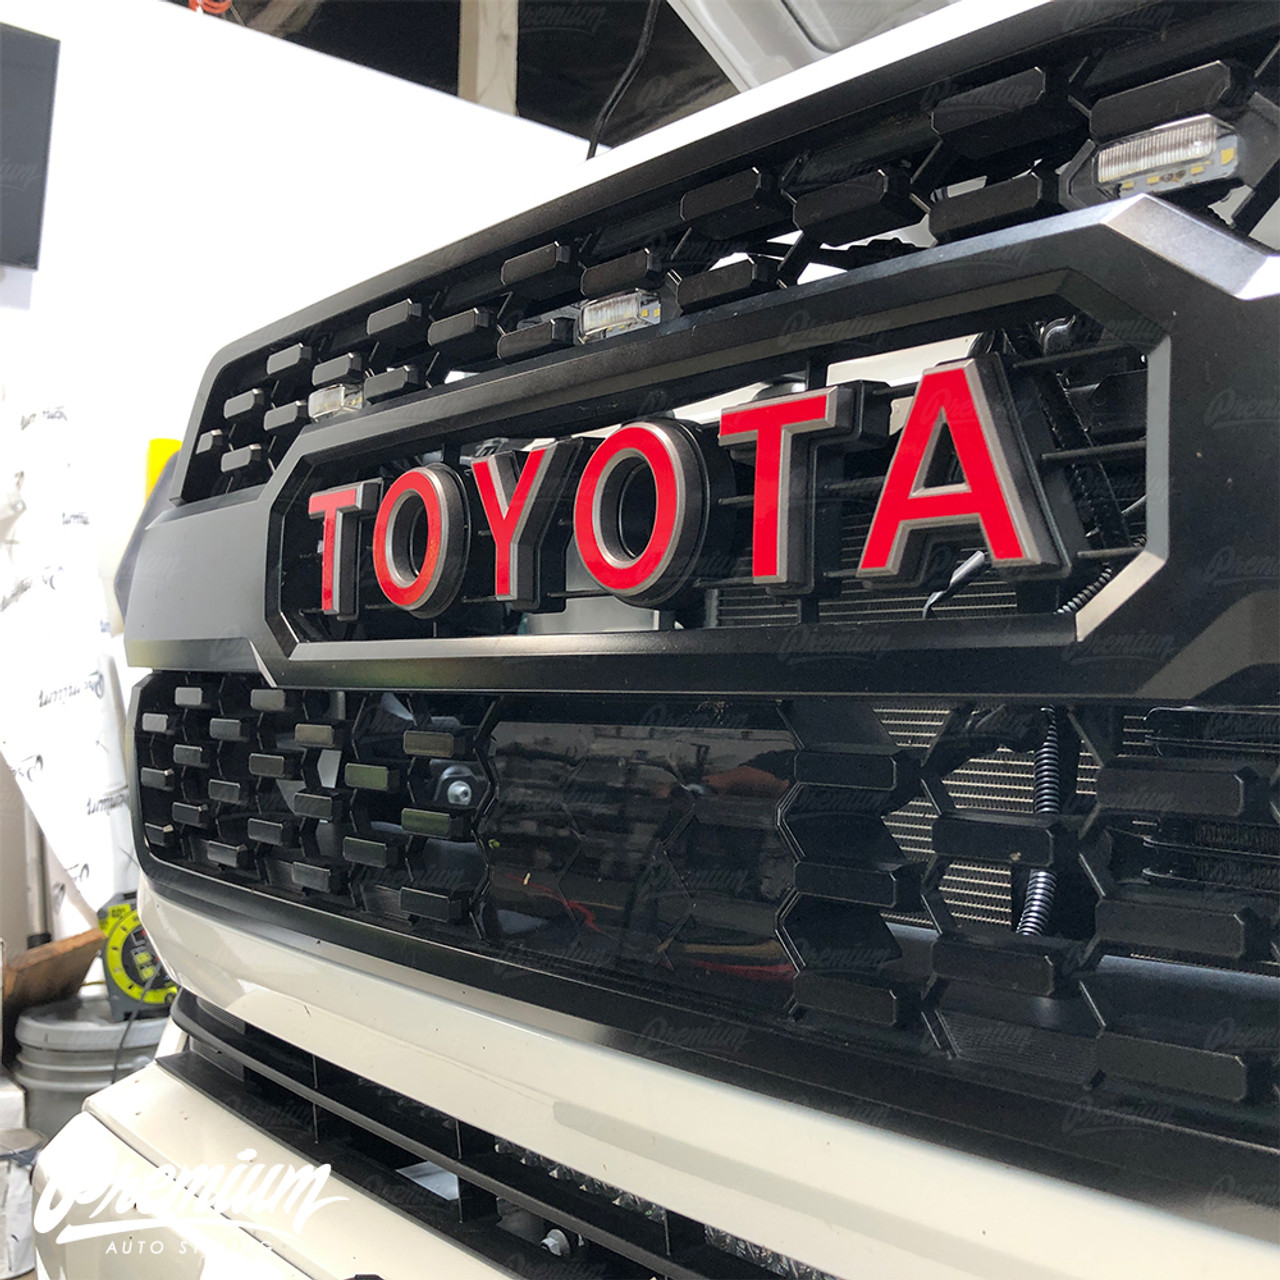 TRD Pro Grille Lettering Vinyl Overlays - Multiple Colors Available